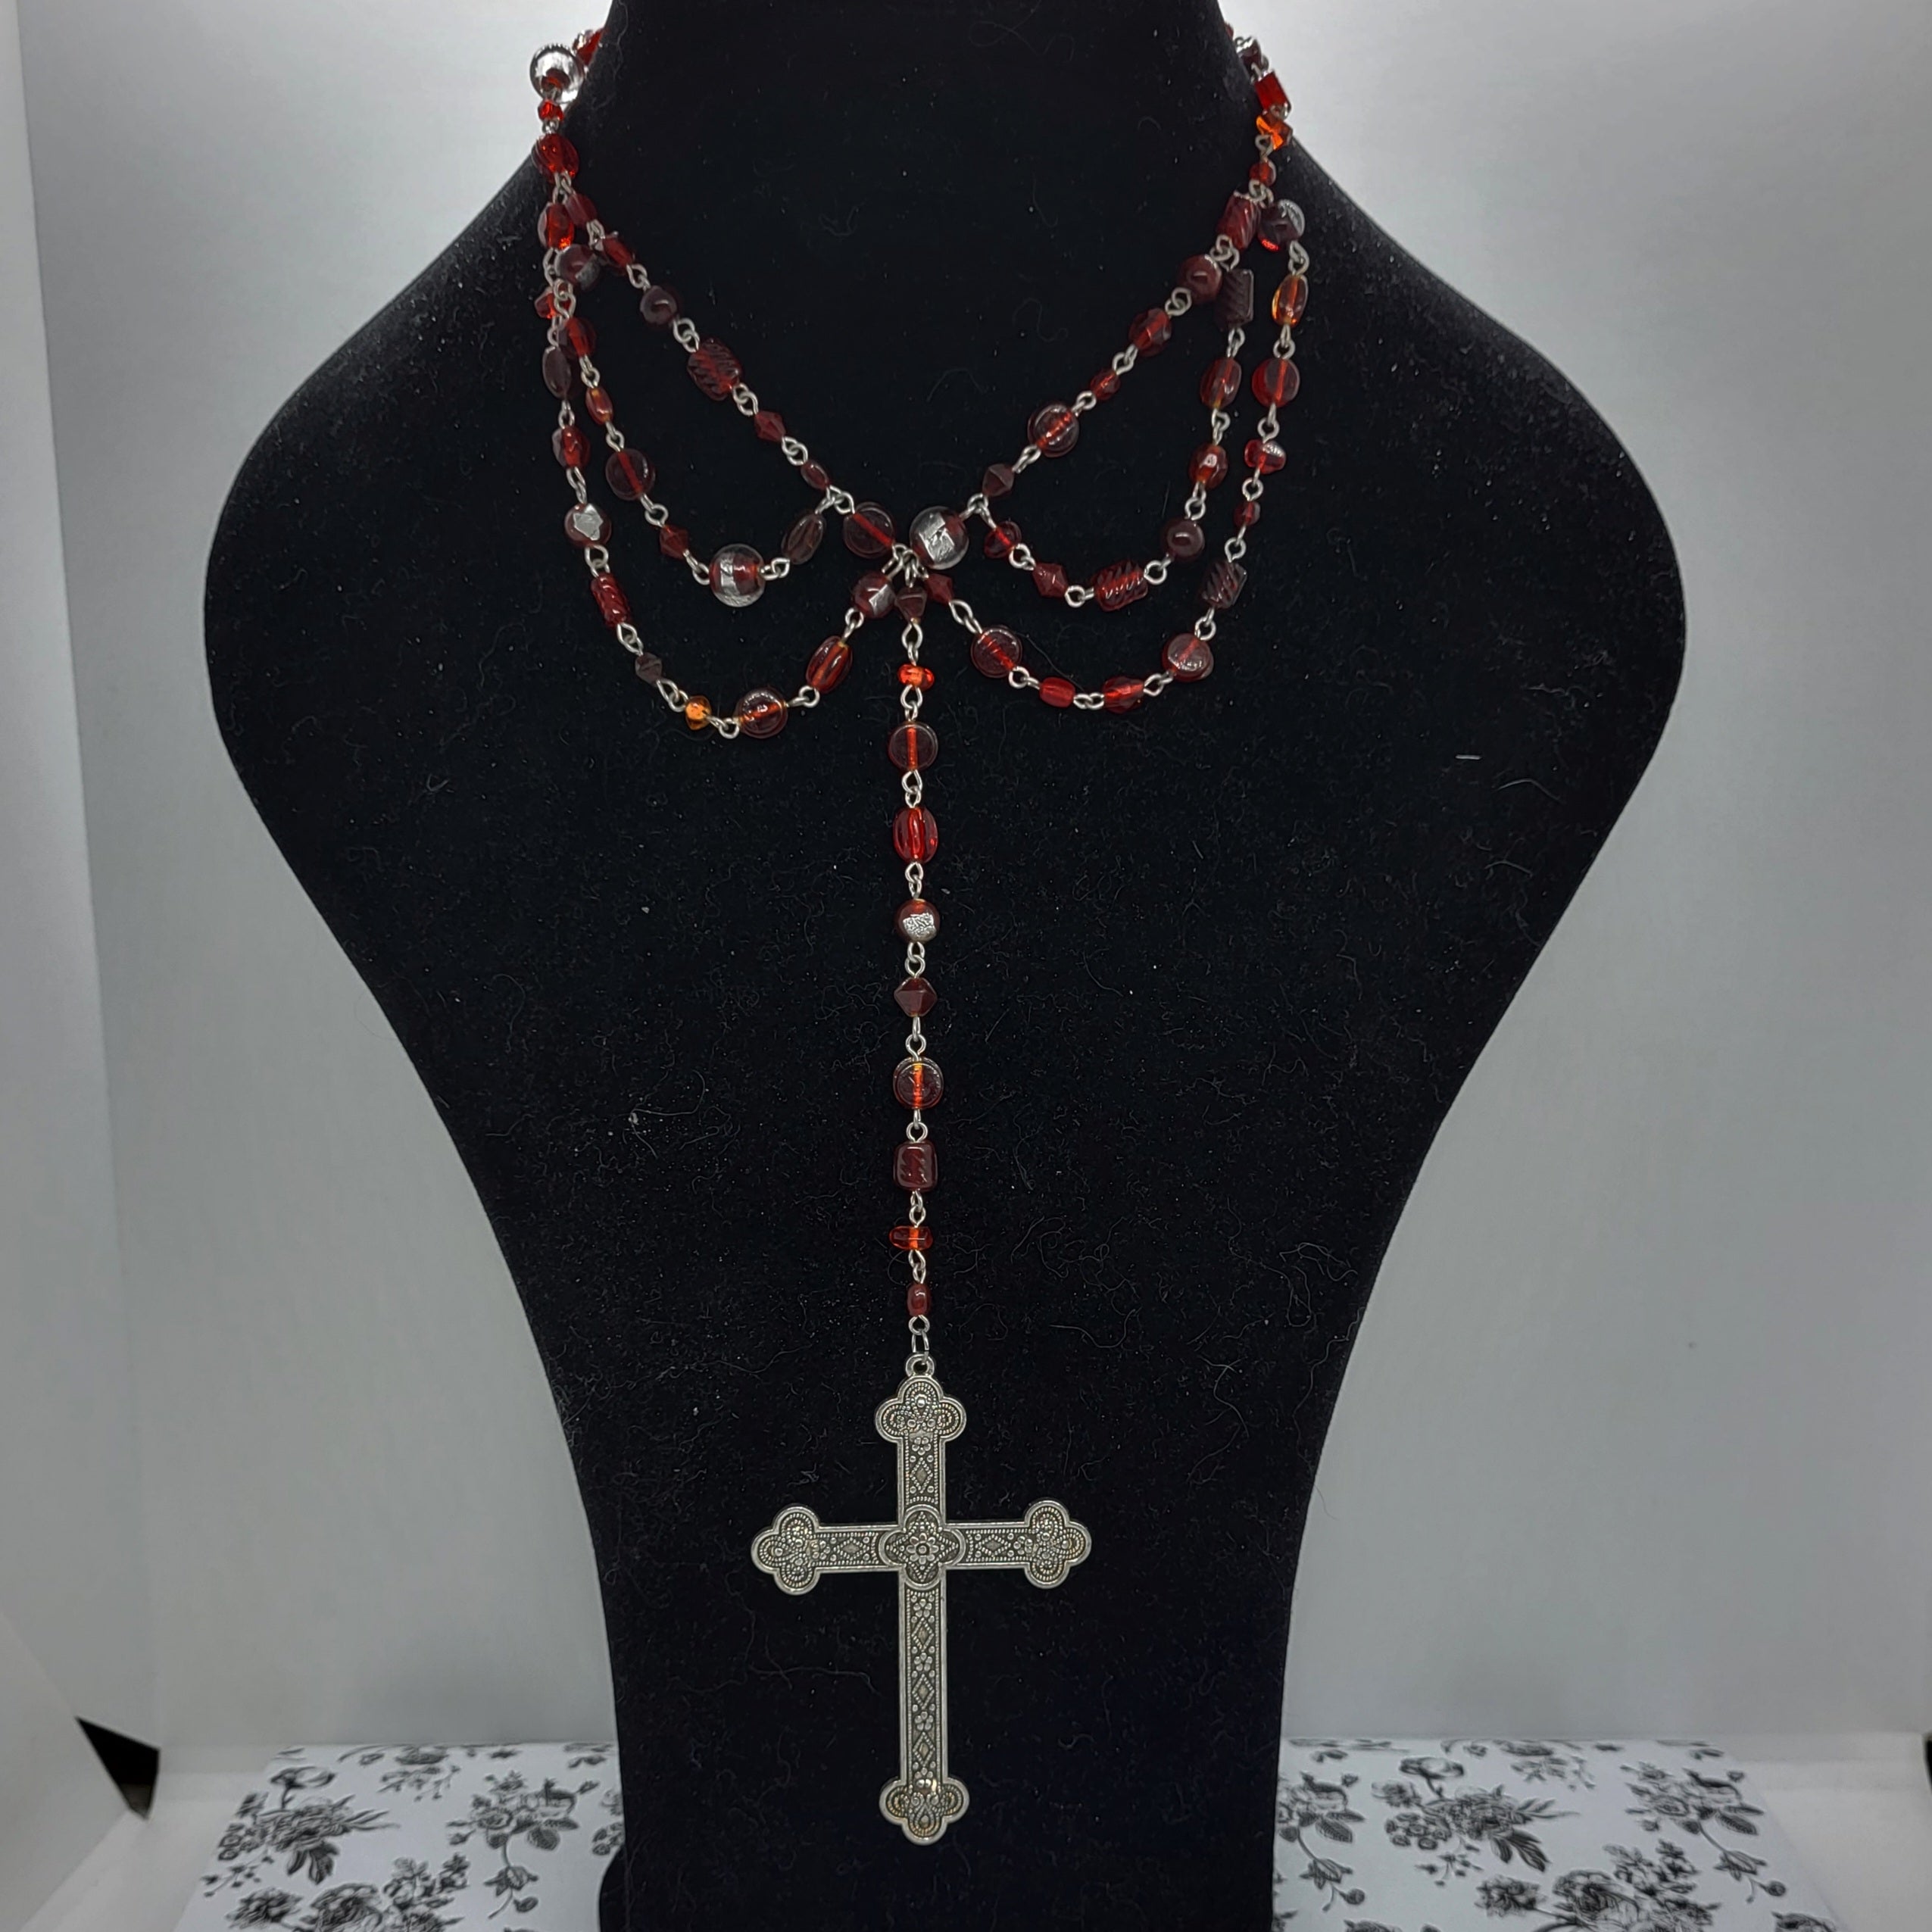 Buy Gothic Rosary Online in India - Etsy